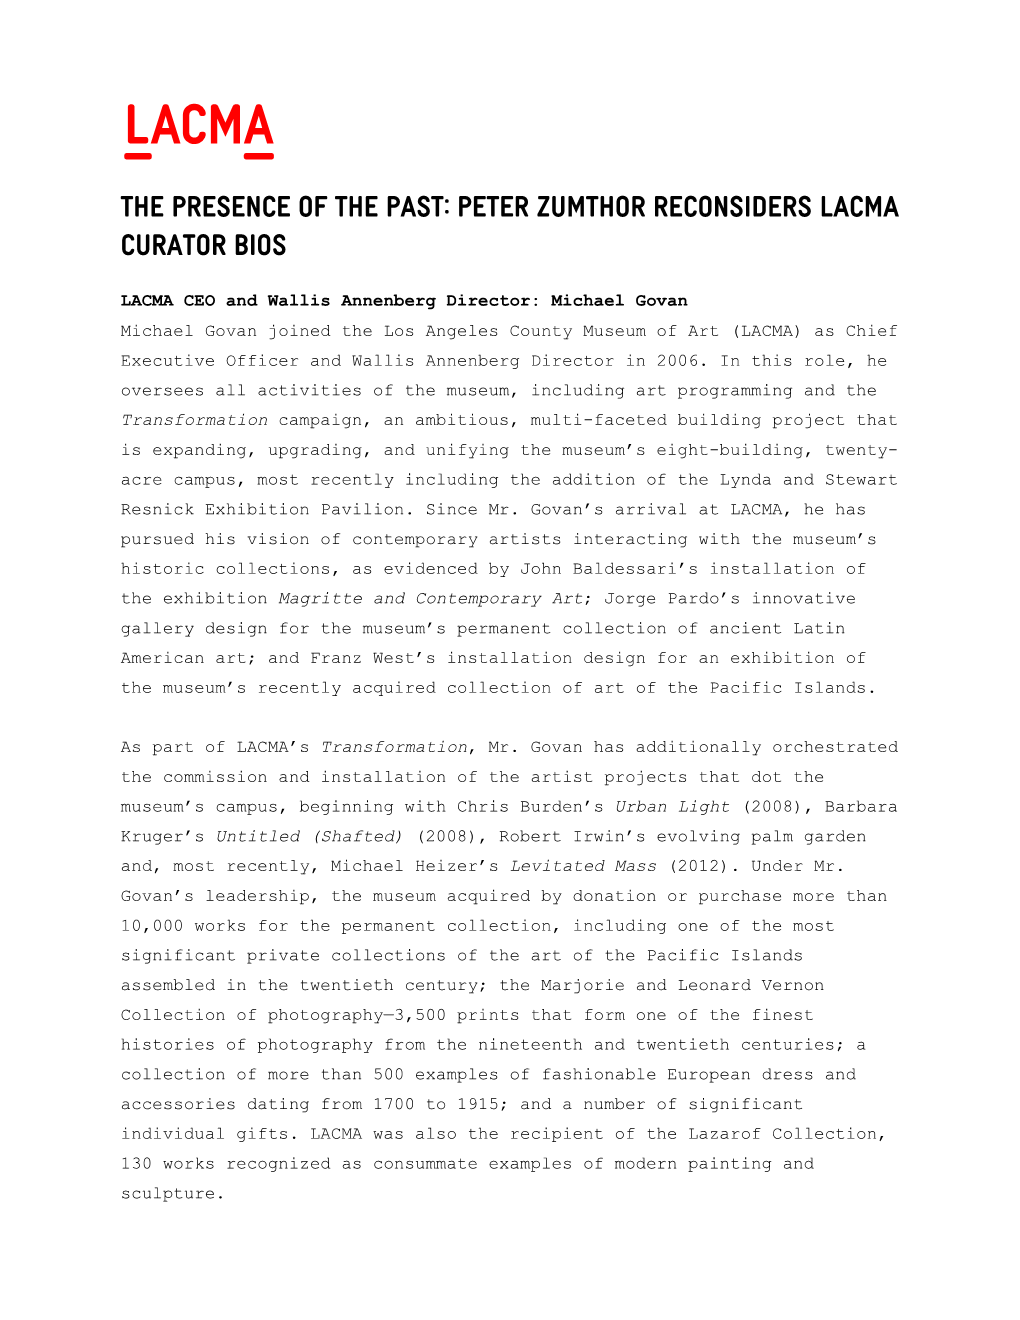 The Presence of the Past: Peter Zumthor Reconsiders LACMA Curator Bios